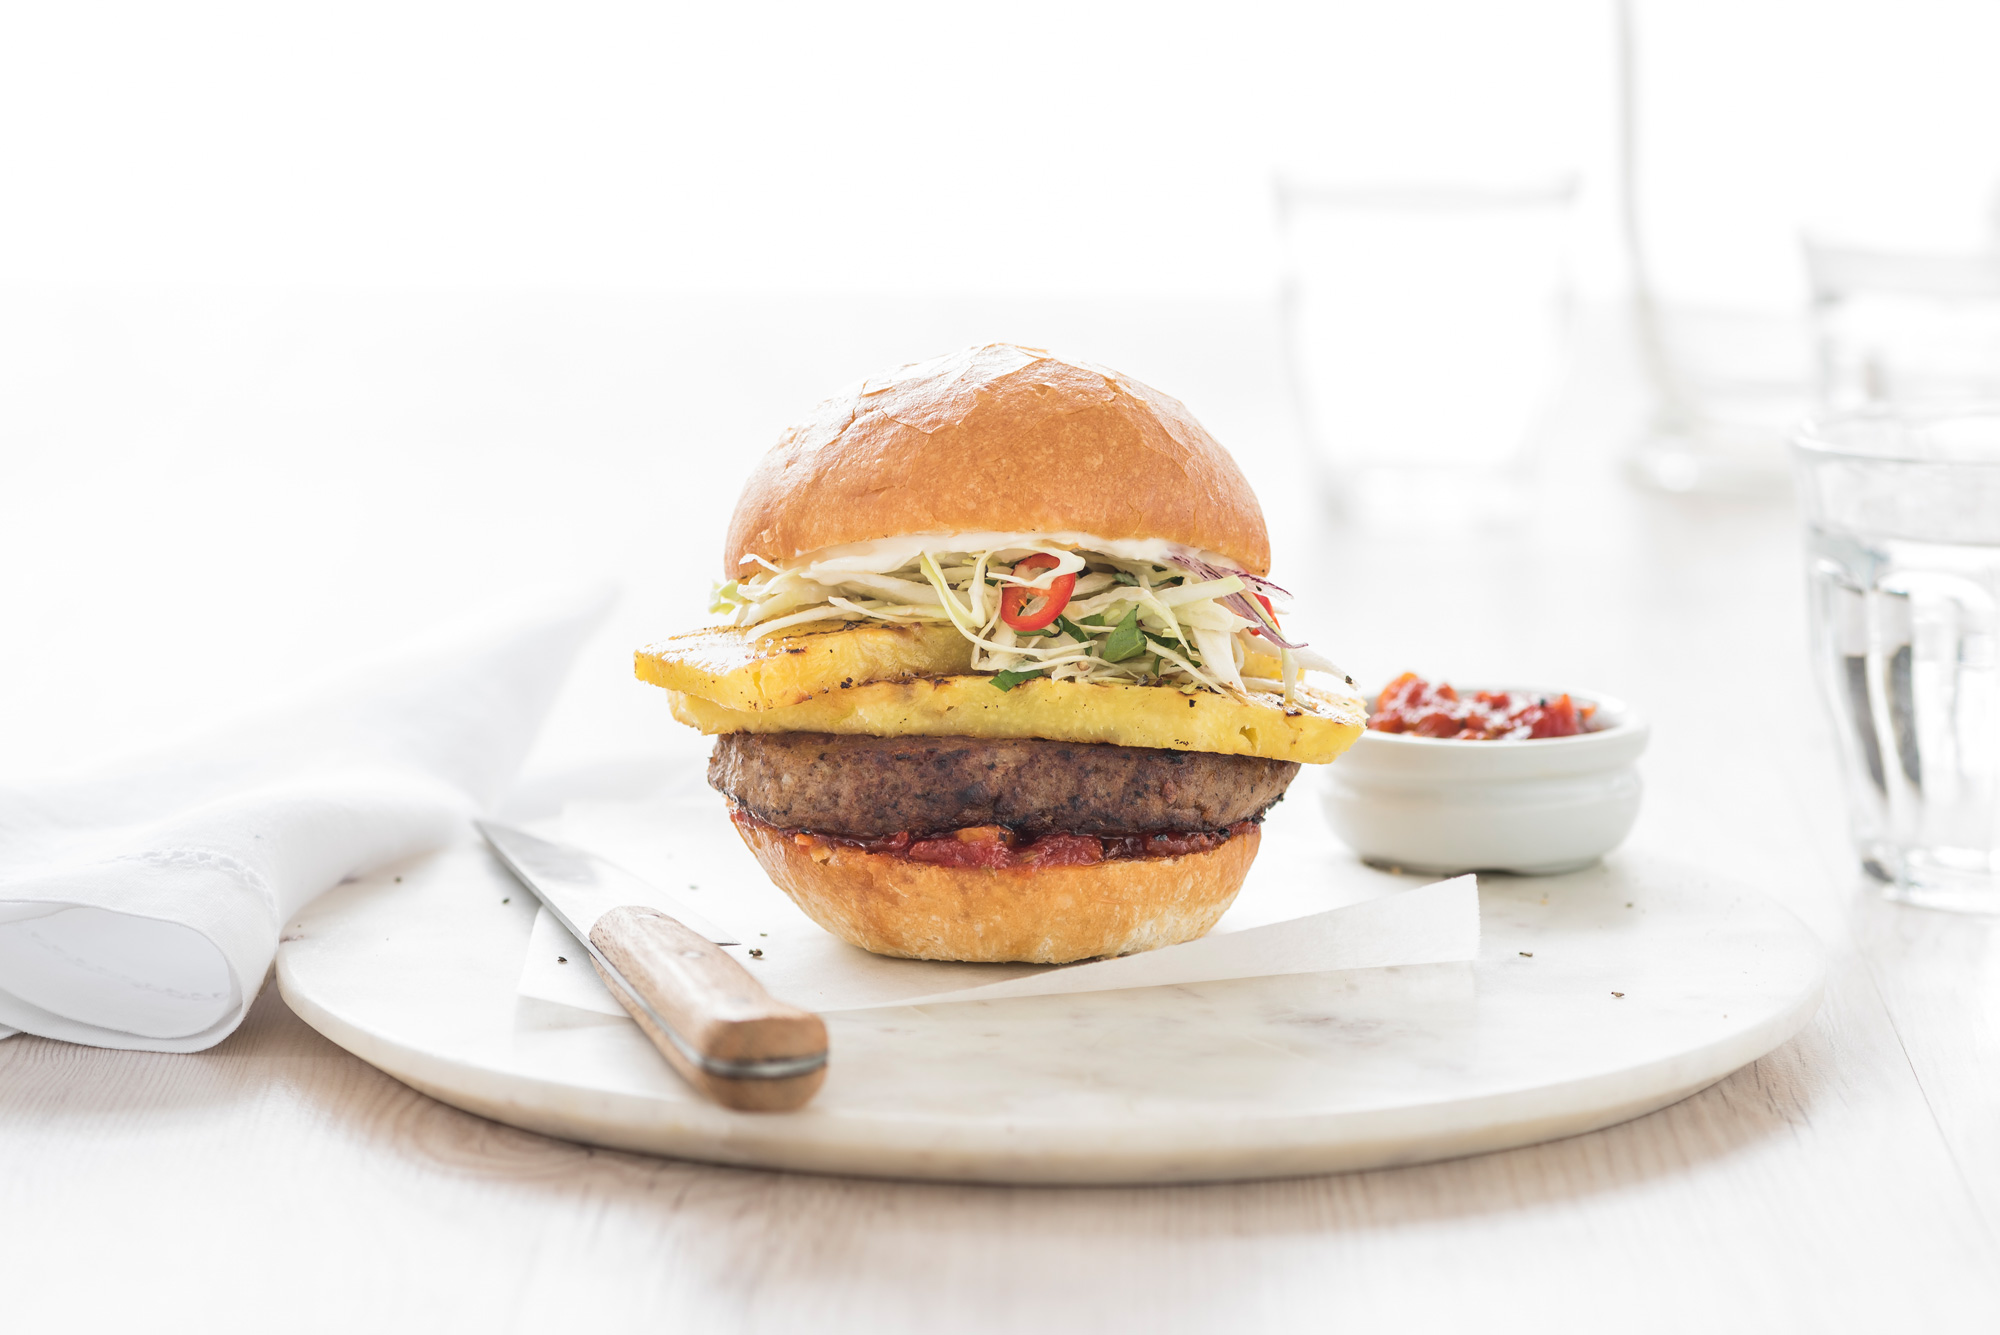 Grilled Pineapple & Slaw Beef Burger